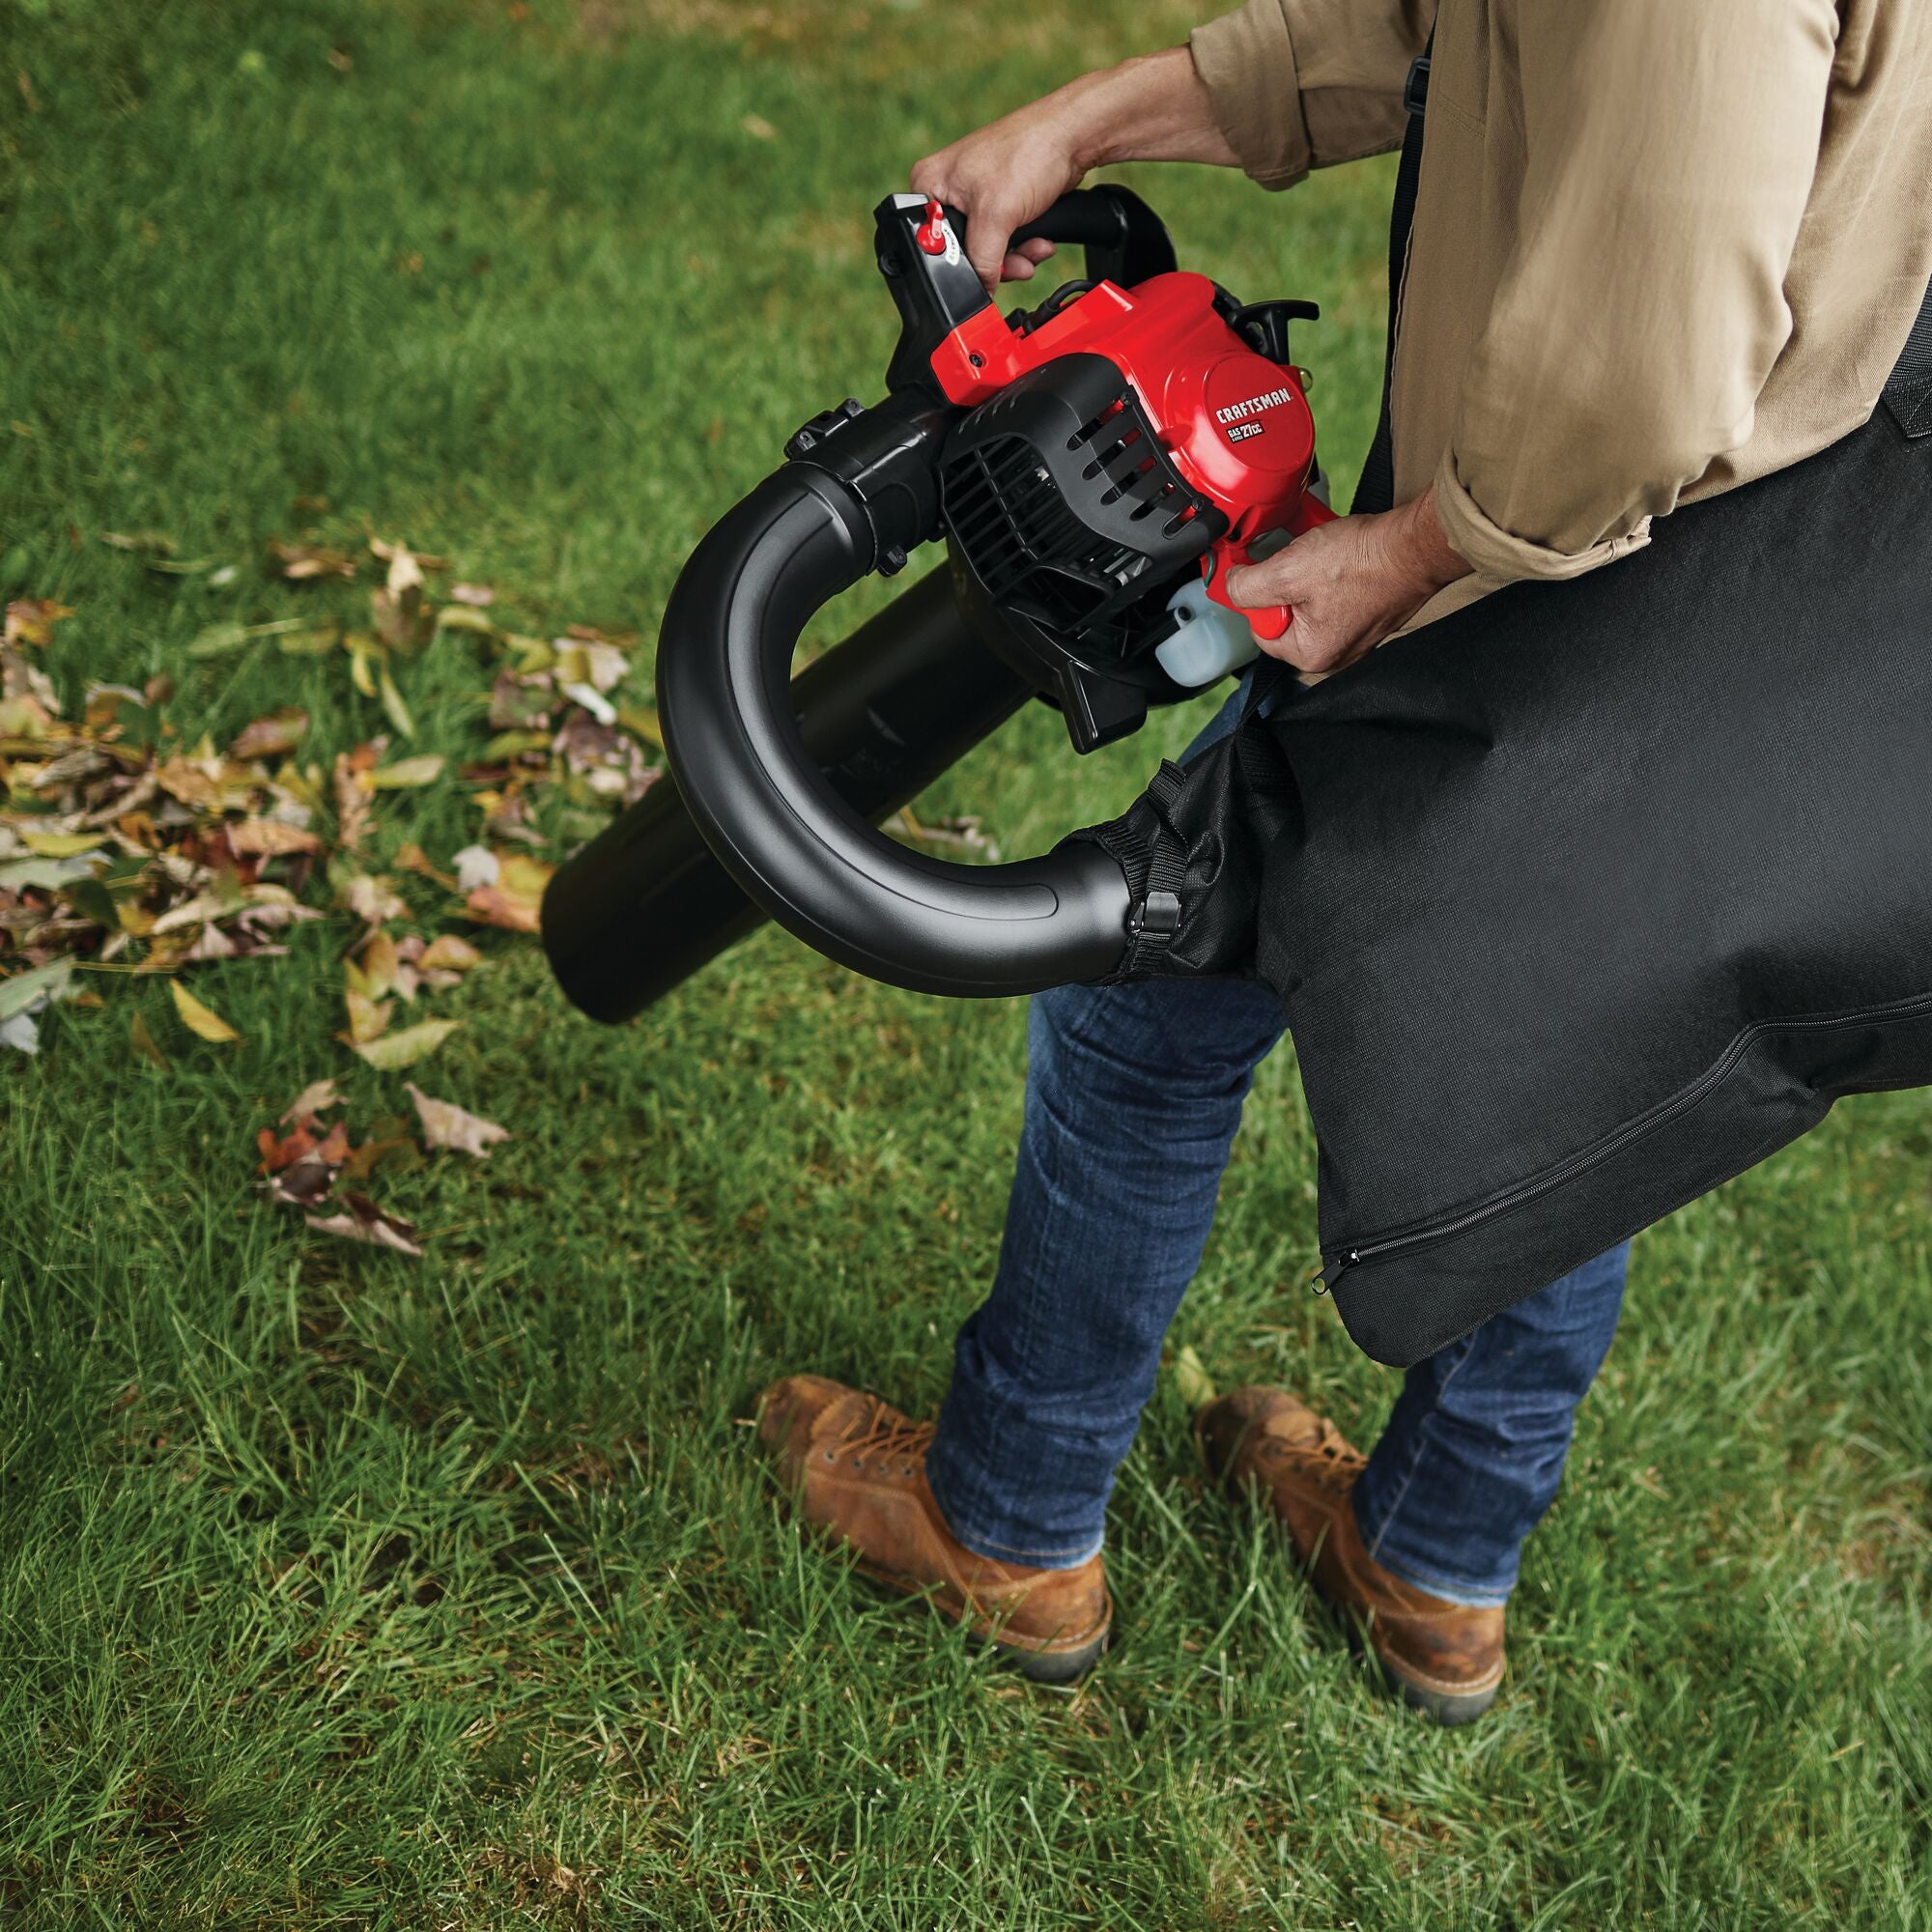 2 cycle full crank engine gas leaf blower vacuum being used by a person to remove leaves from the yard.